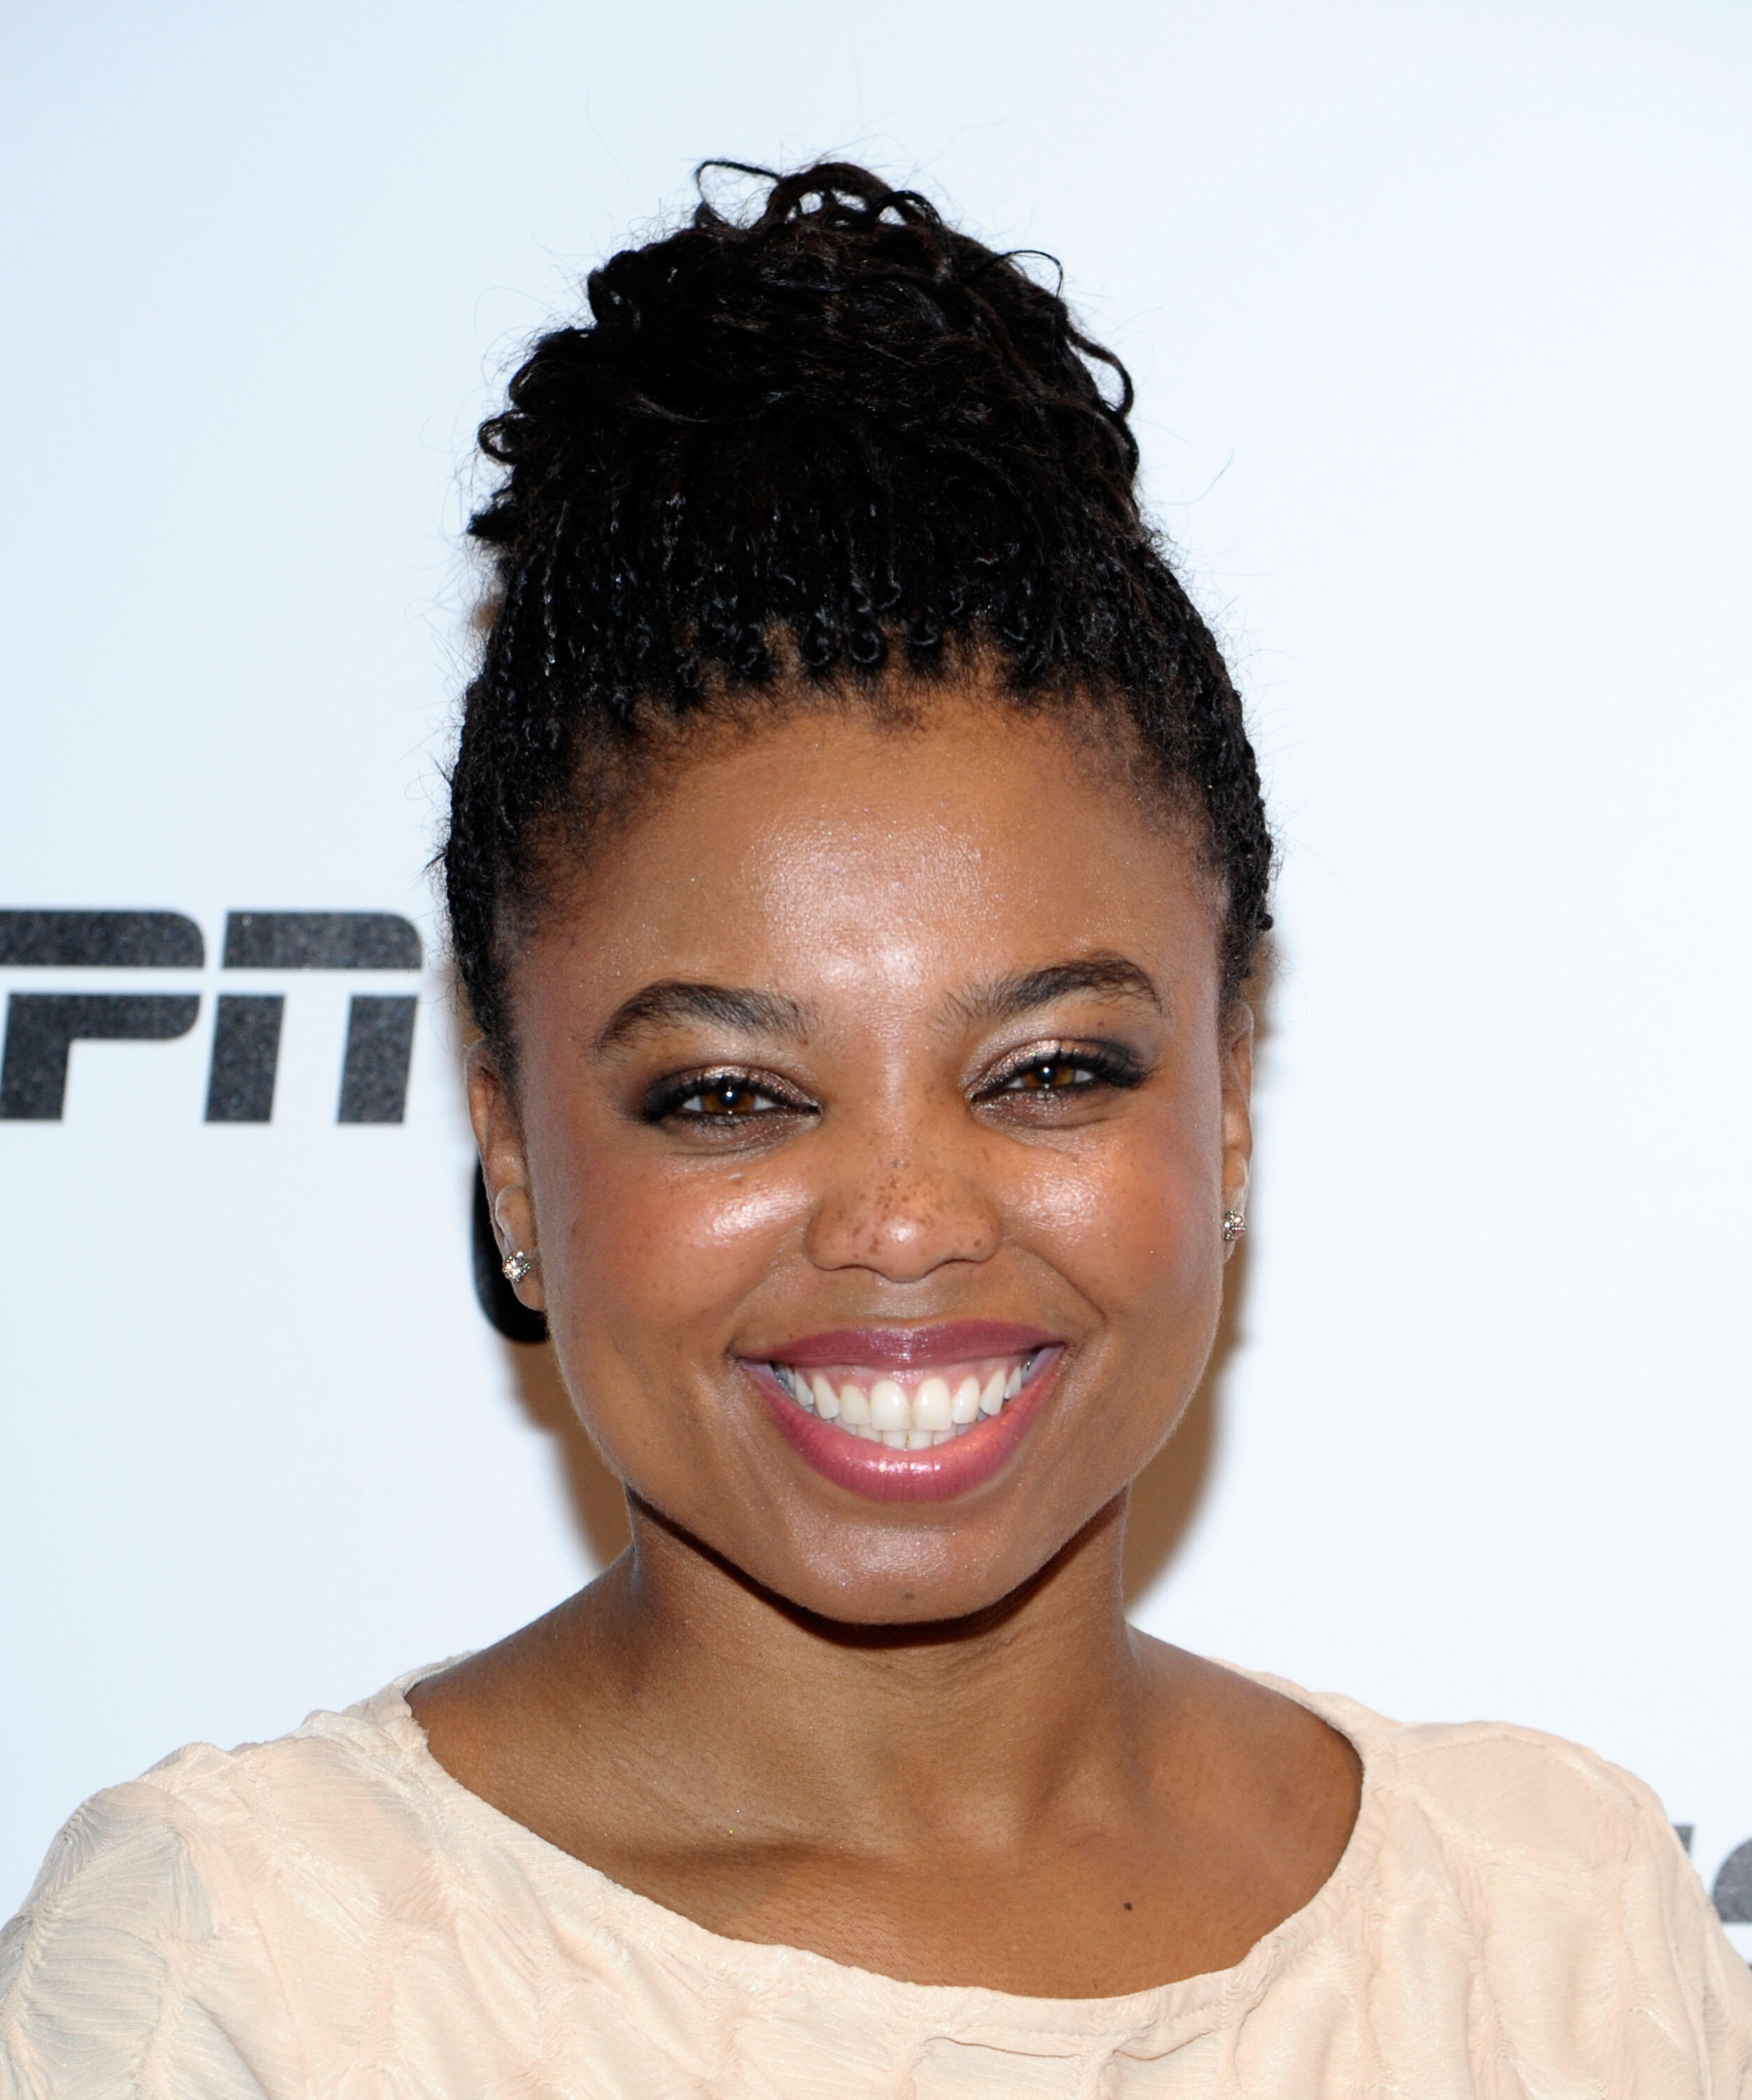 ESPN Suspends Jemele Hill for Two Weeks for 